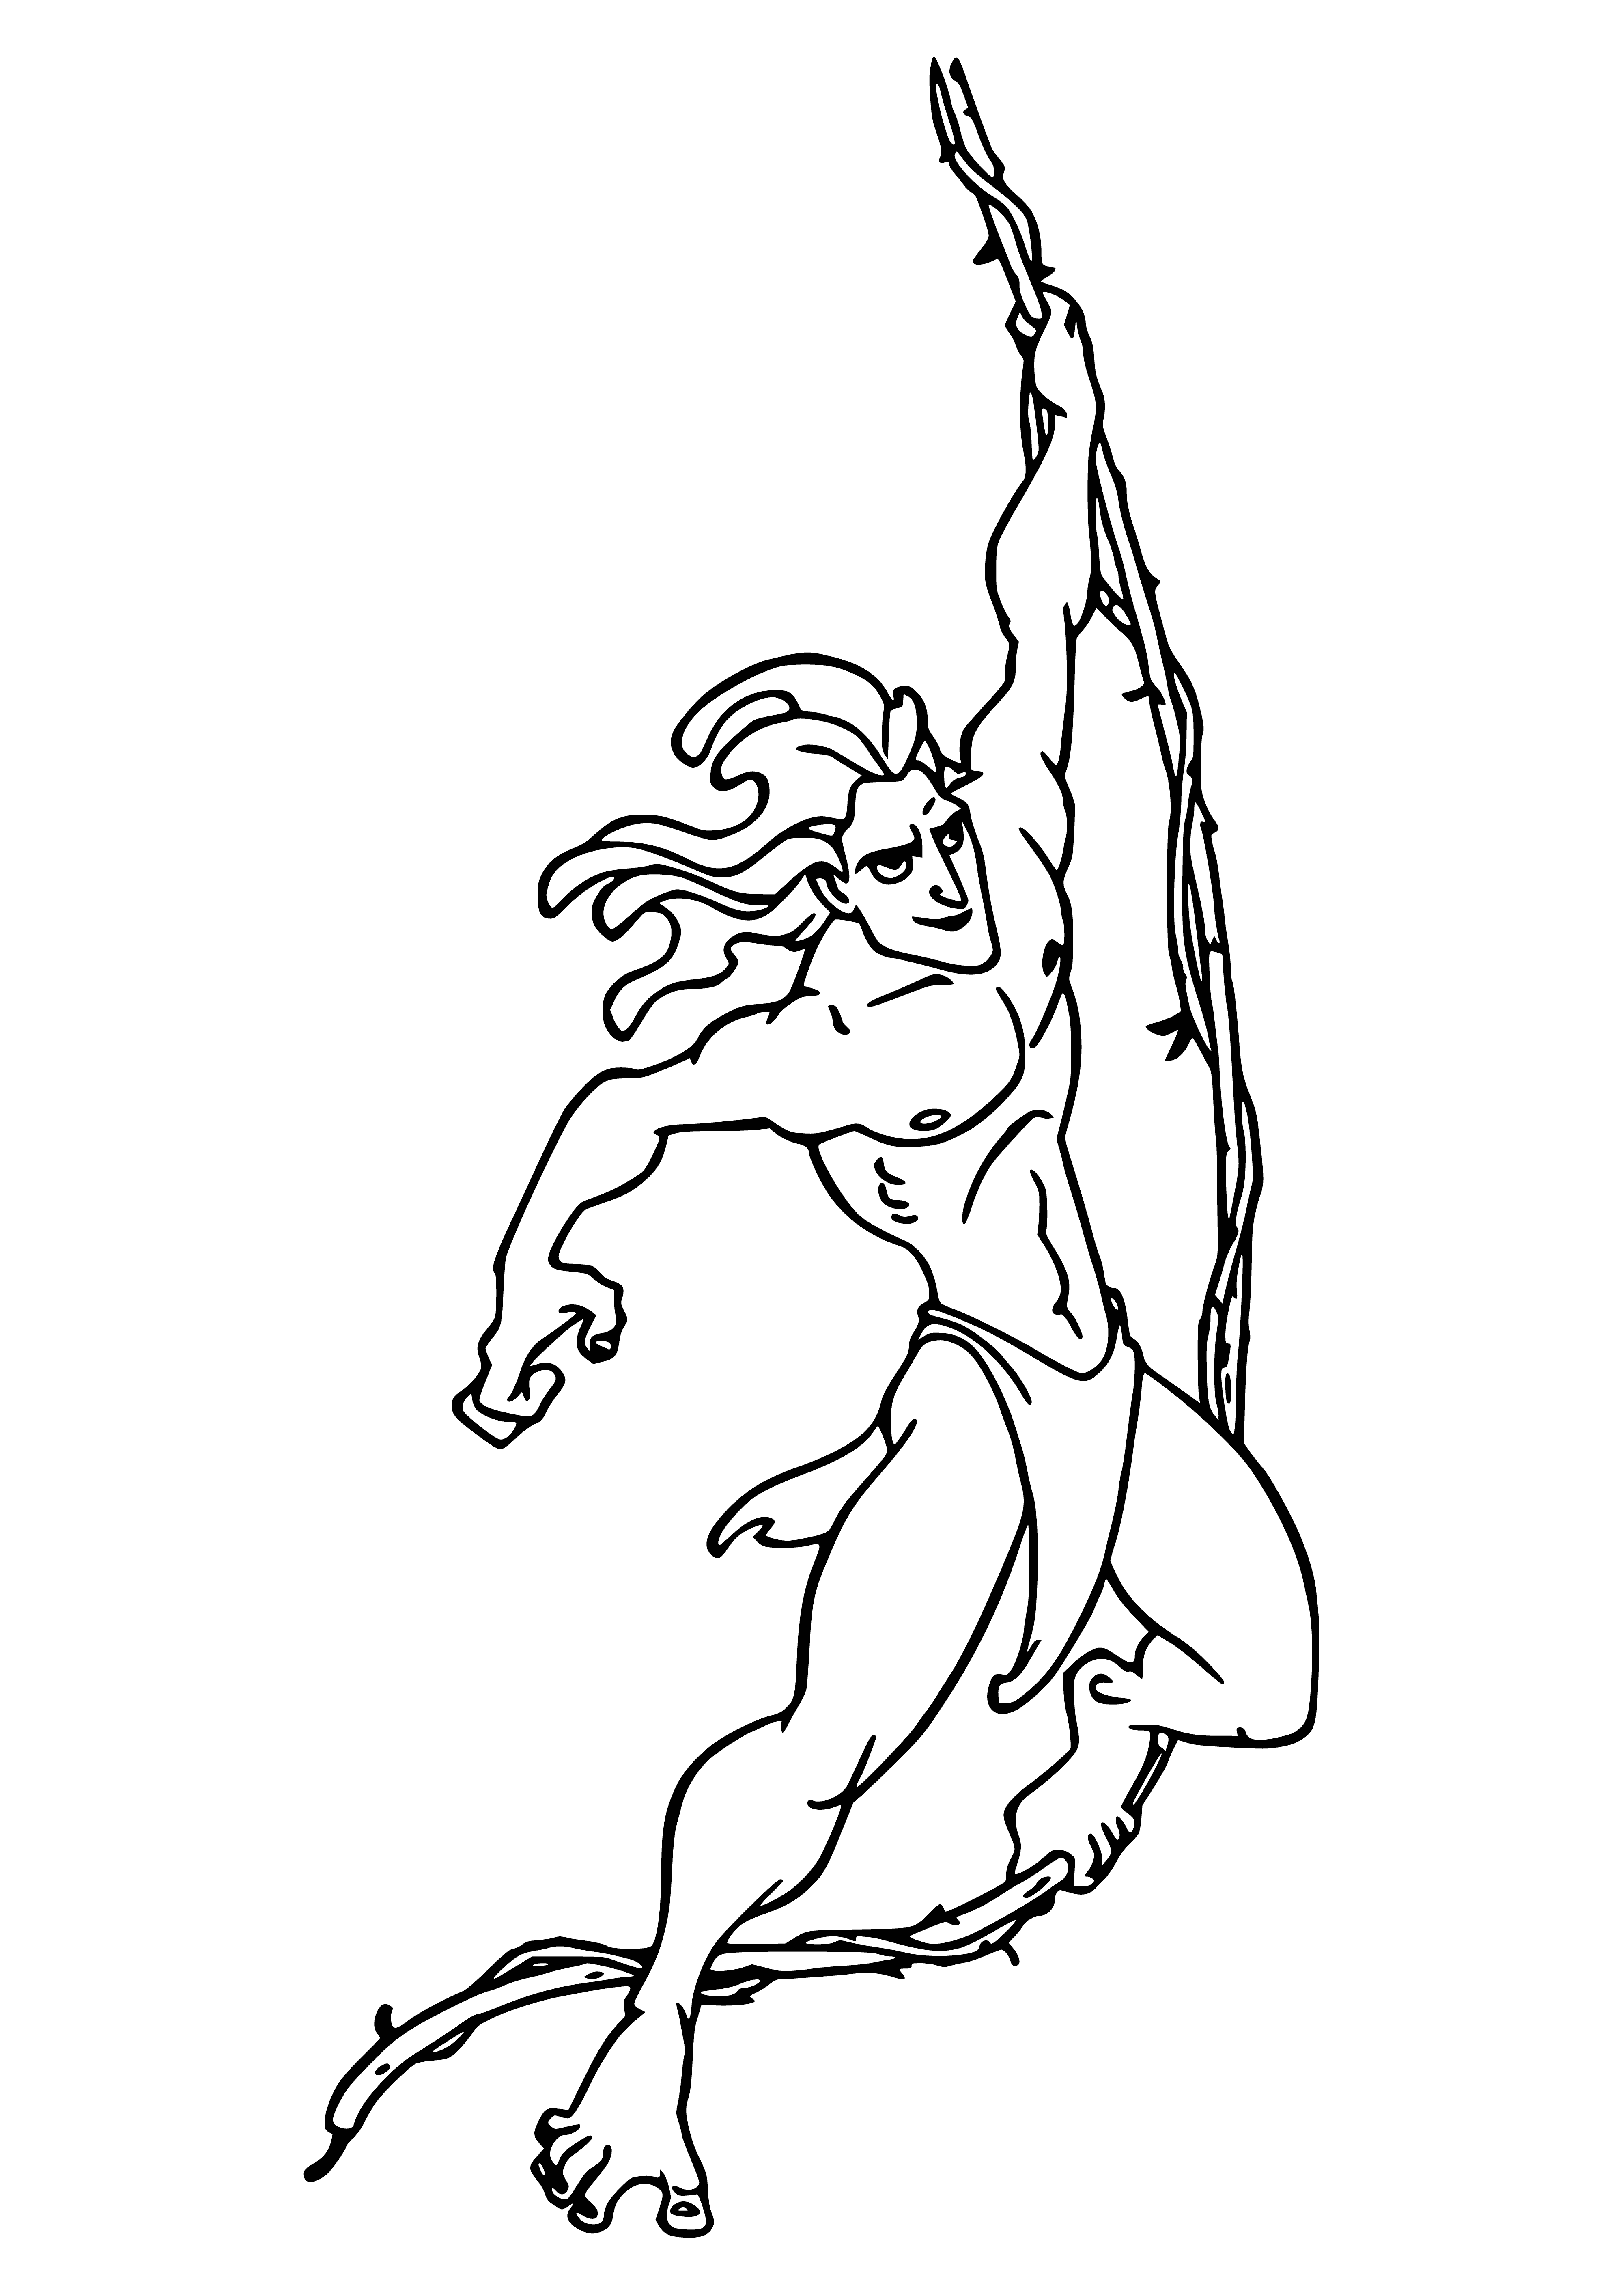 Tarzan on the vine coloring page